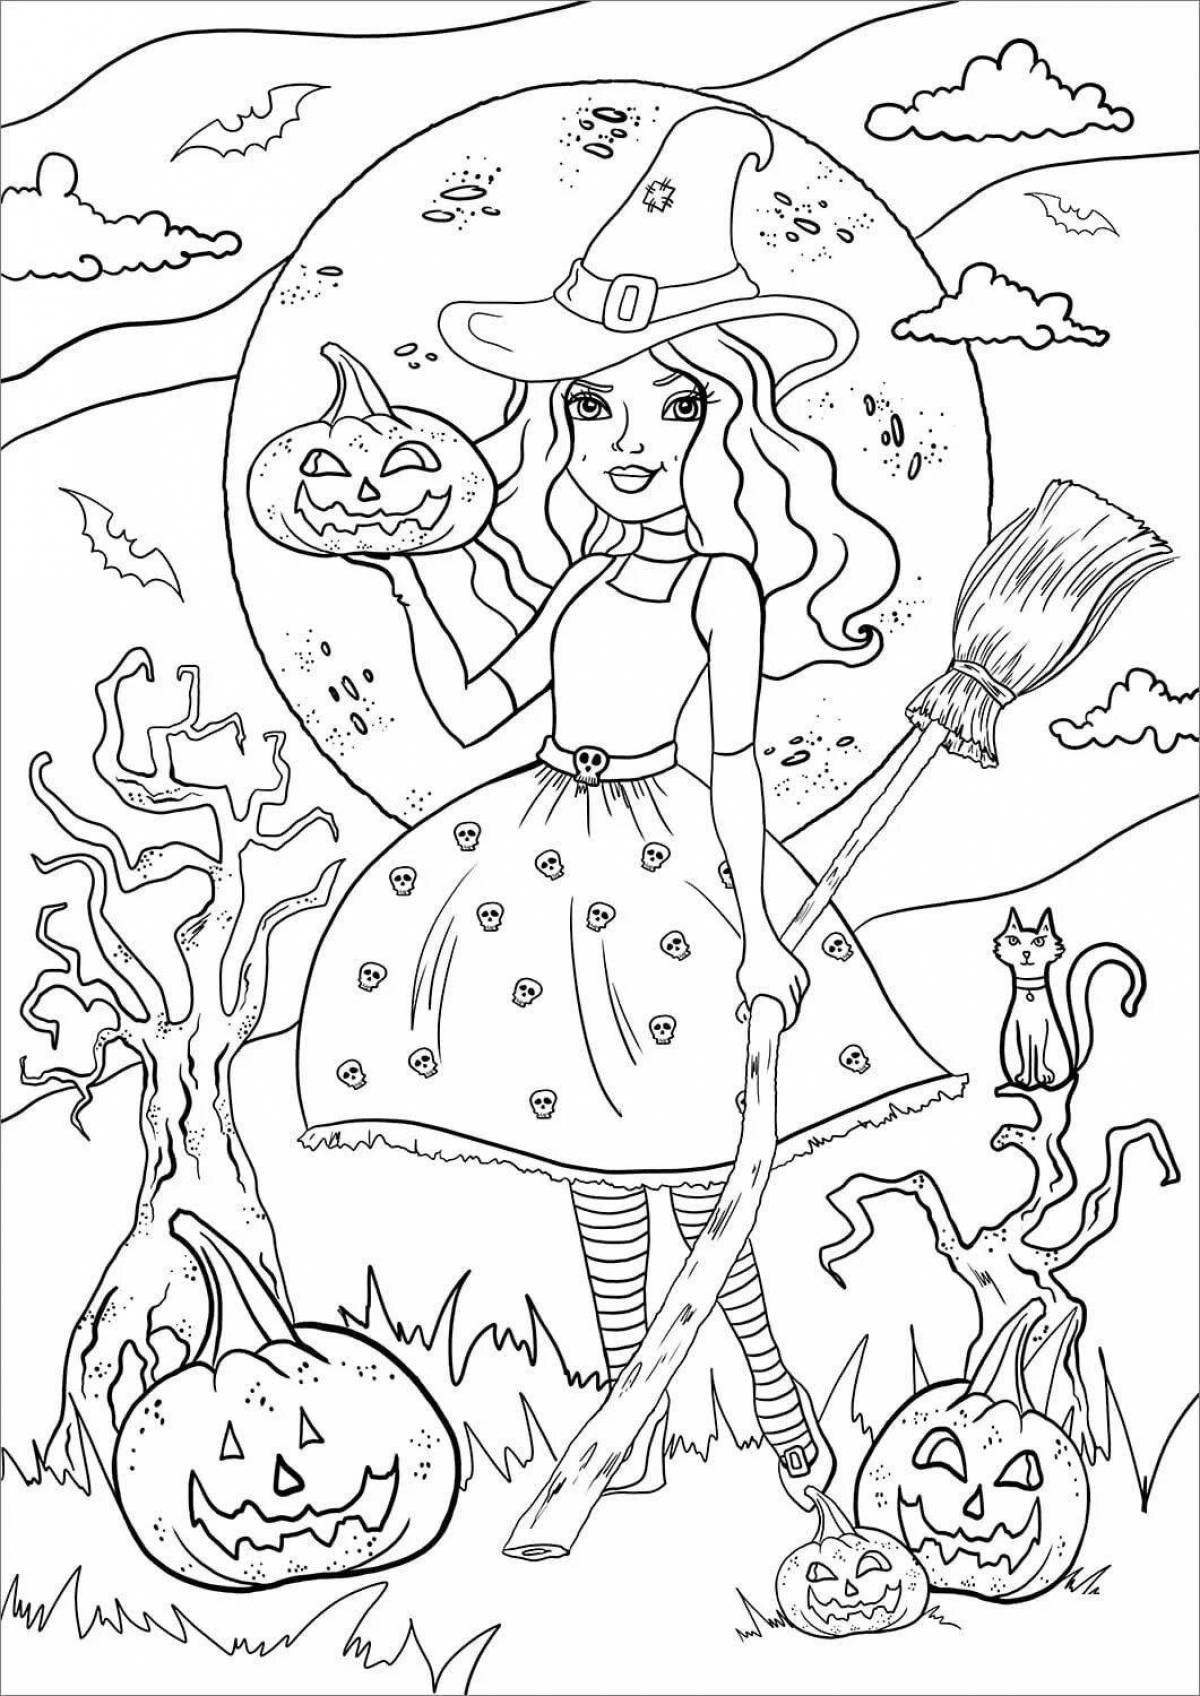 Tempting coloring book for real witches